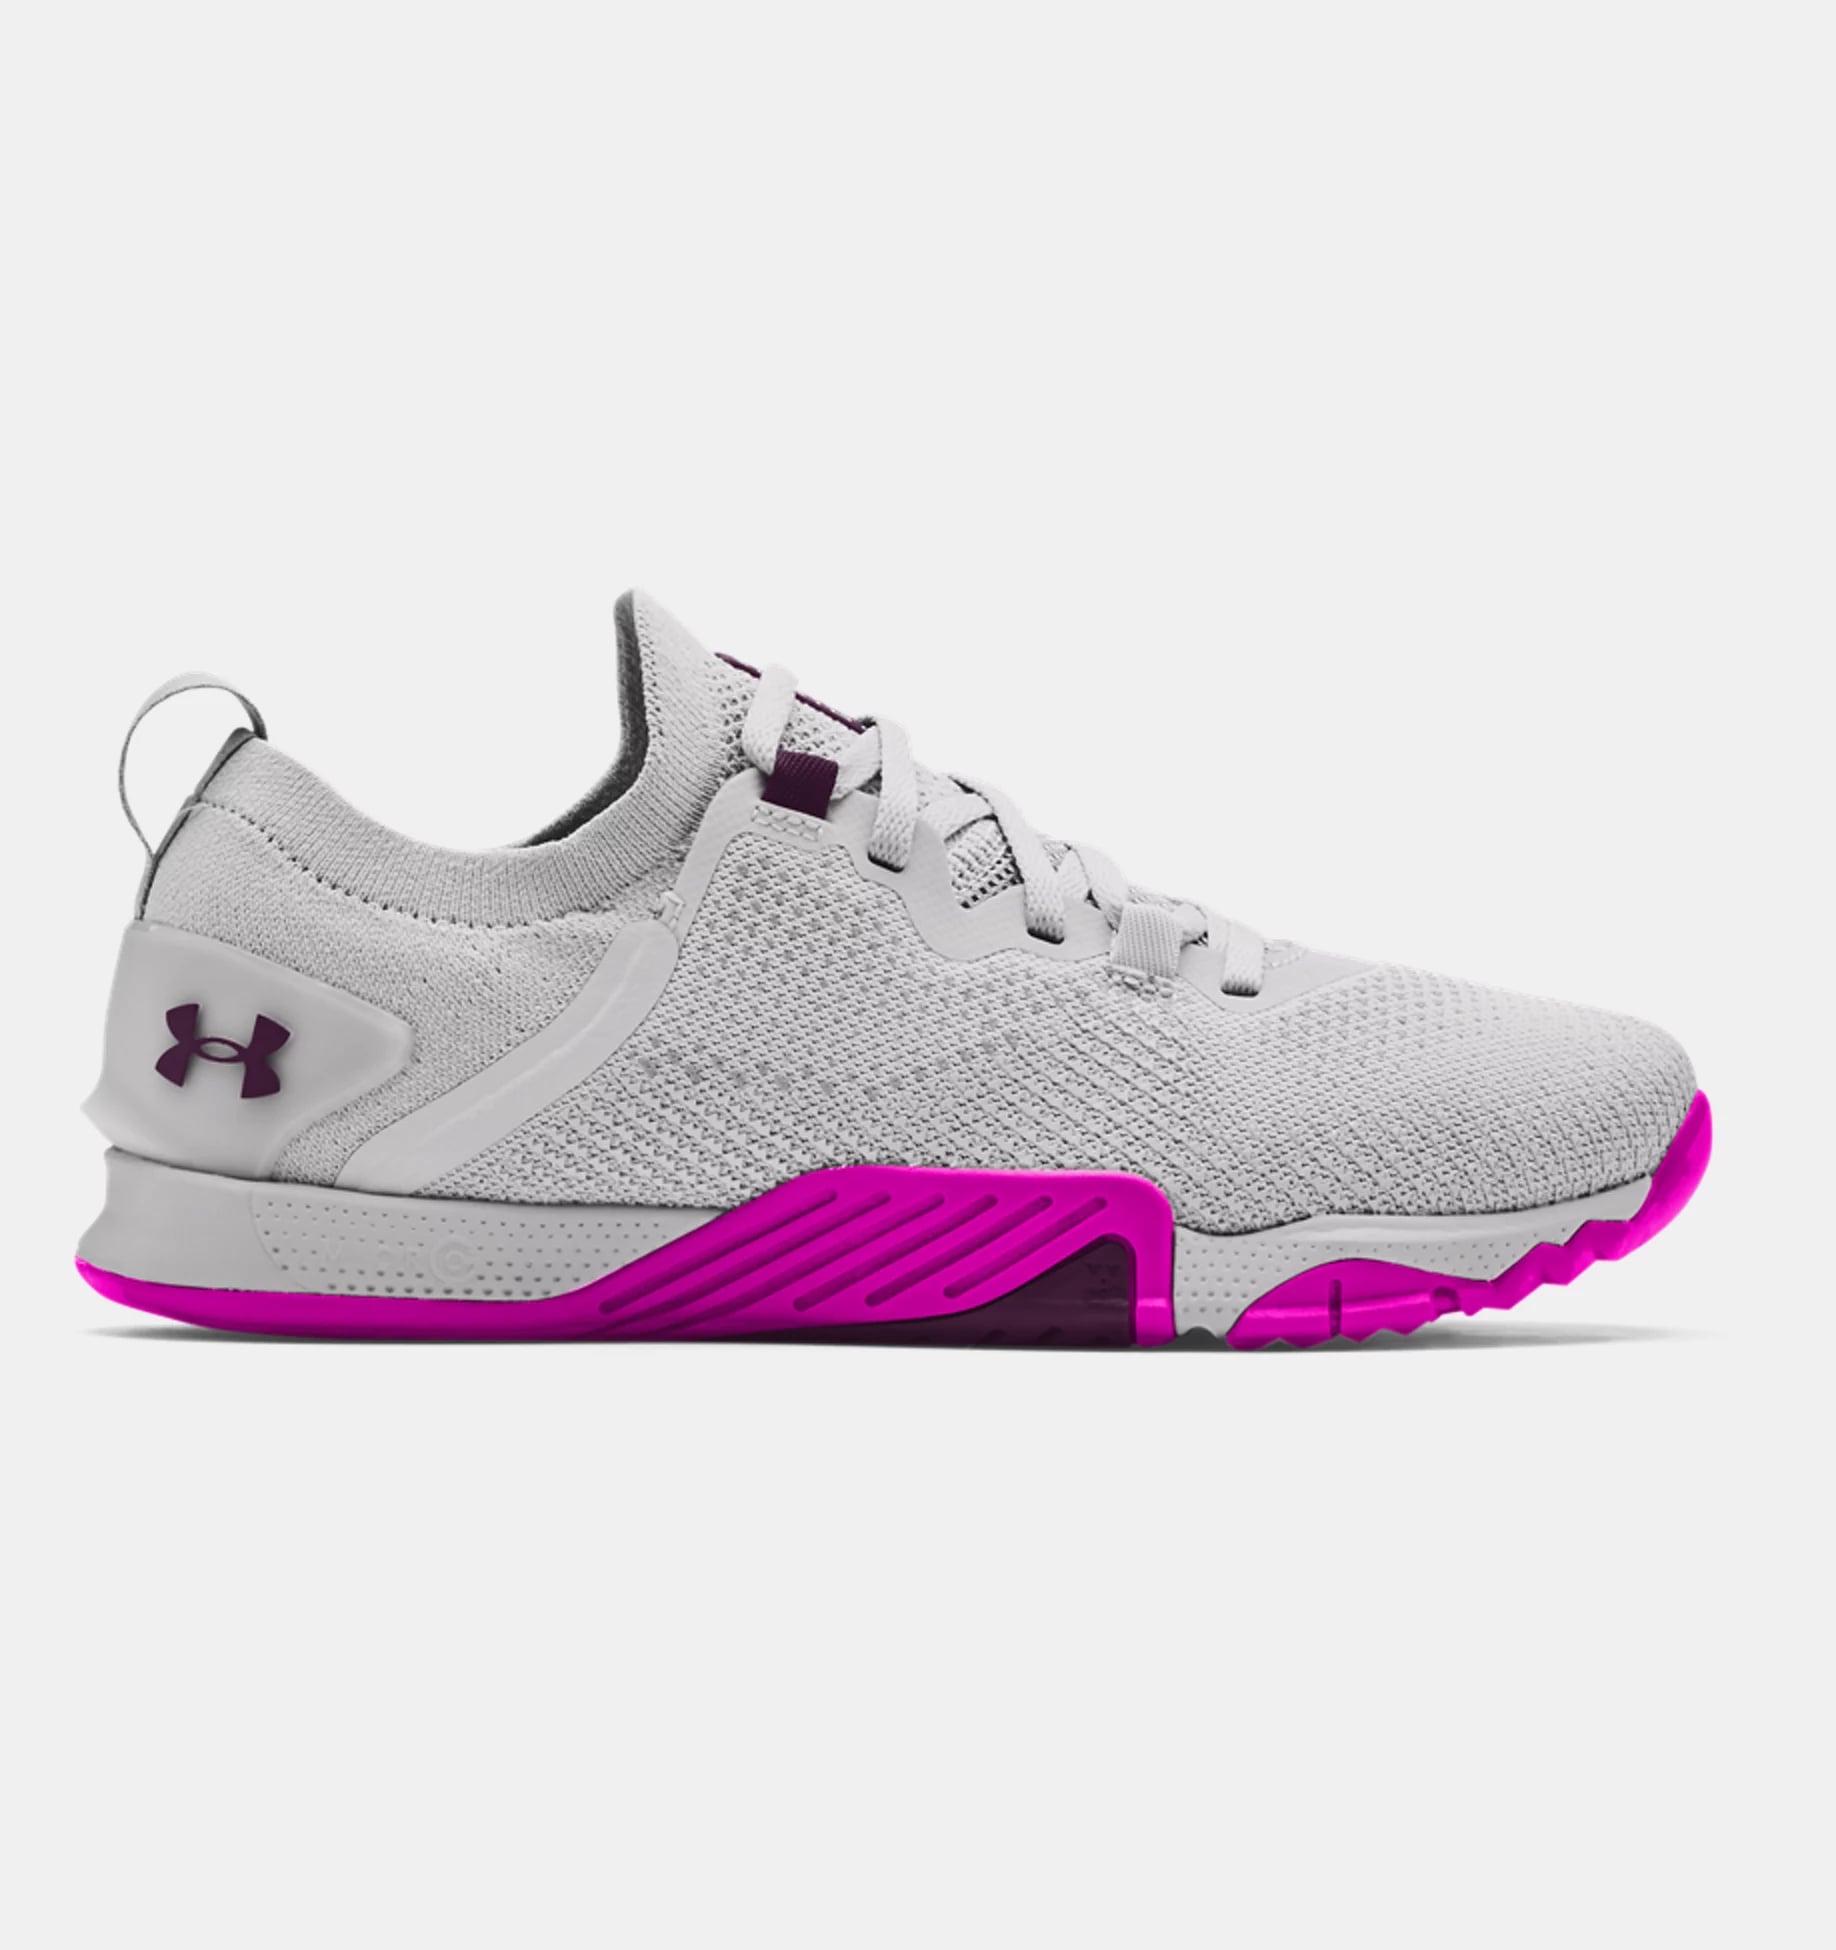 Best Under Armour Shoes For Every Exercise | POPSUGAR Fitness